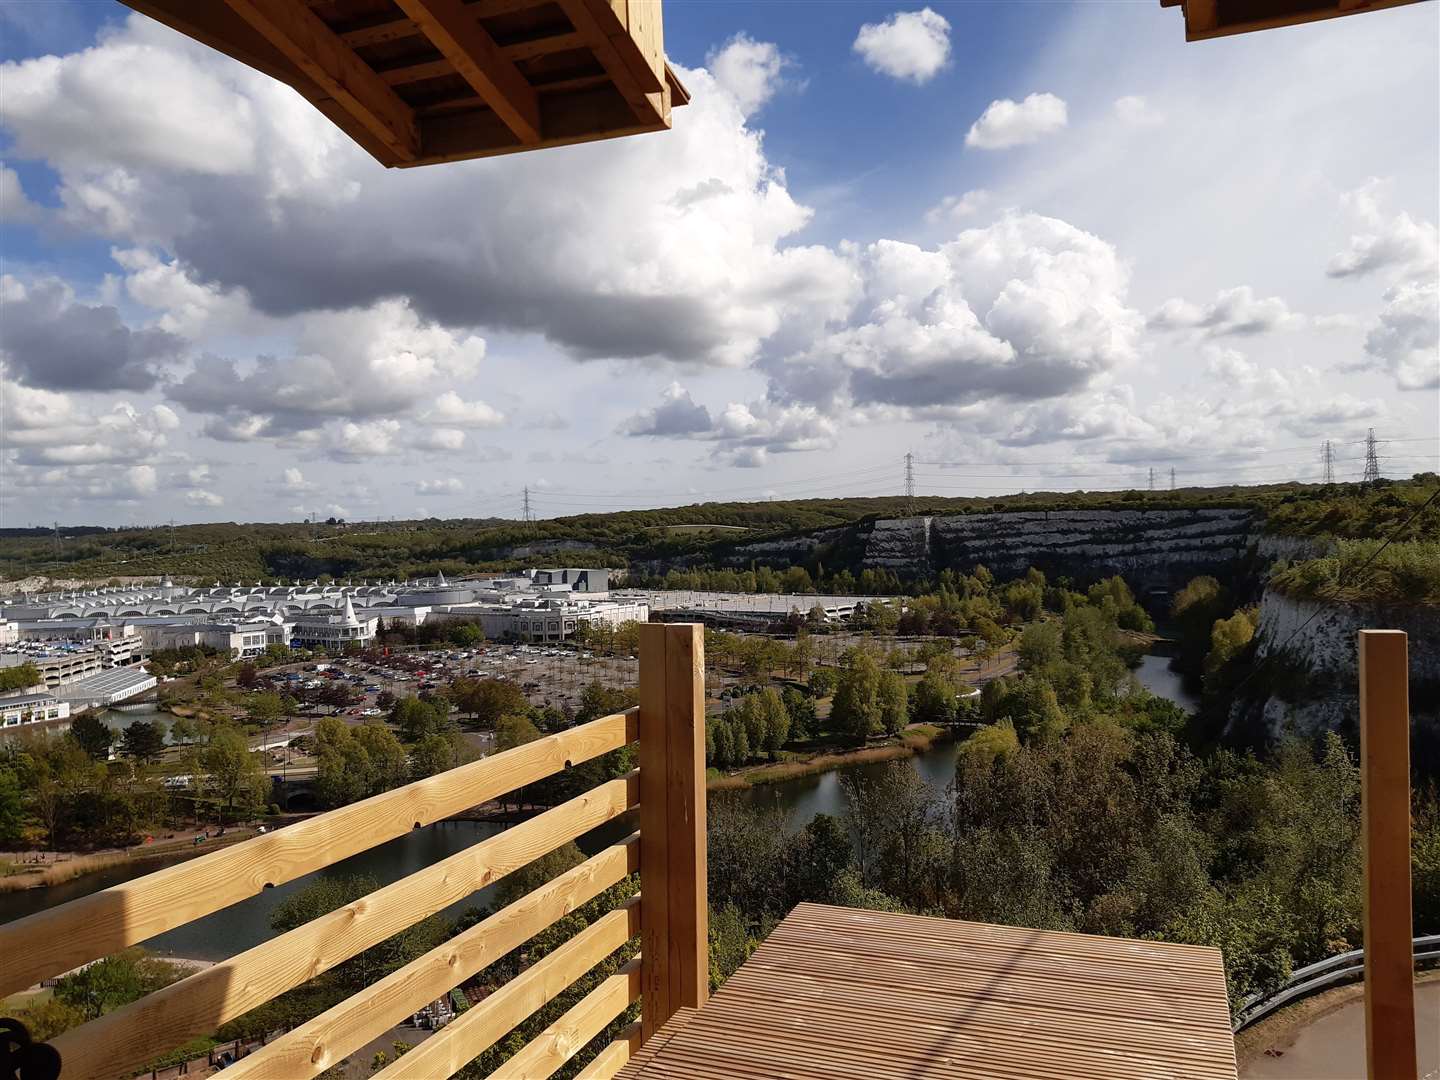 The zipline at Bluewater is going to be England's longest at more than 700m